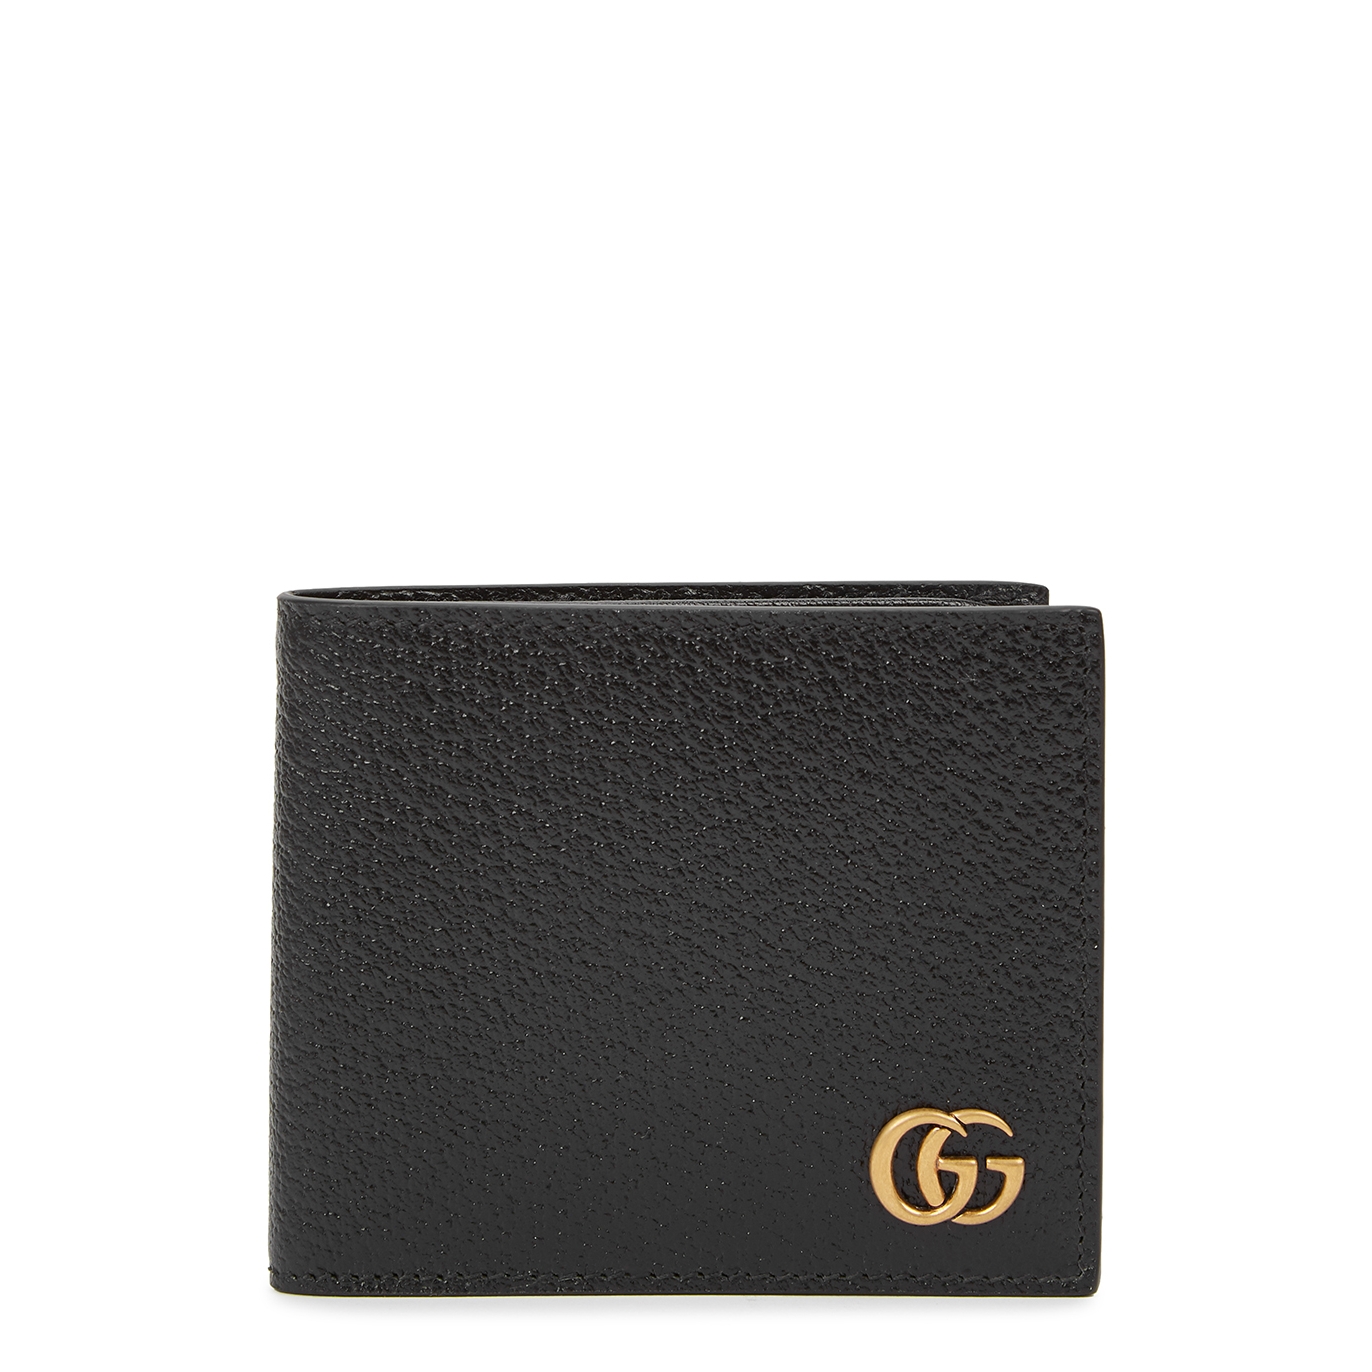 Gucci gg marmont black leather wallet